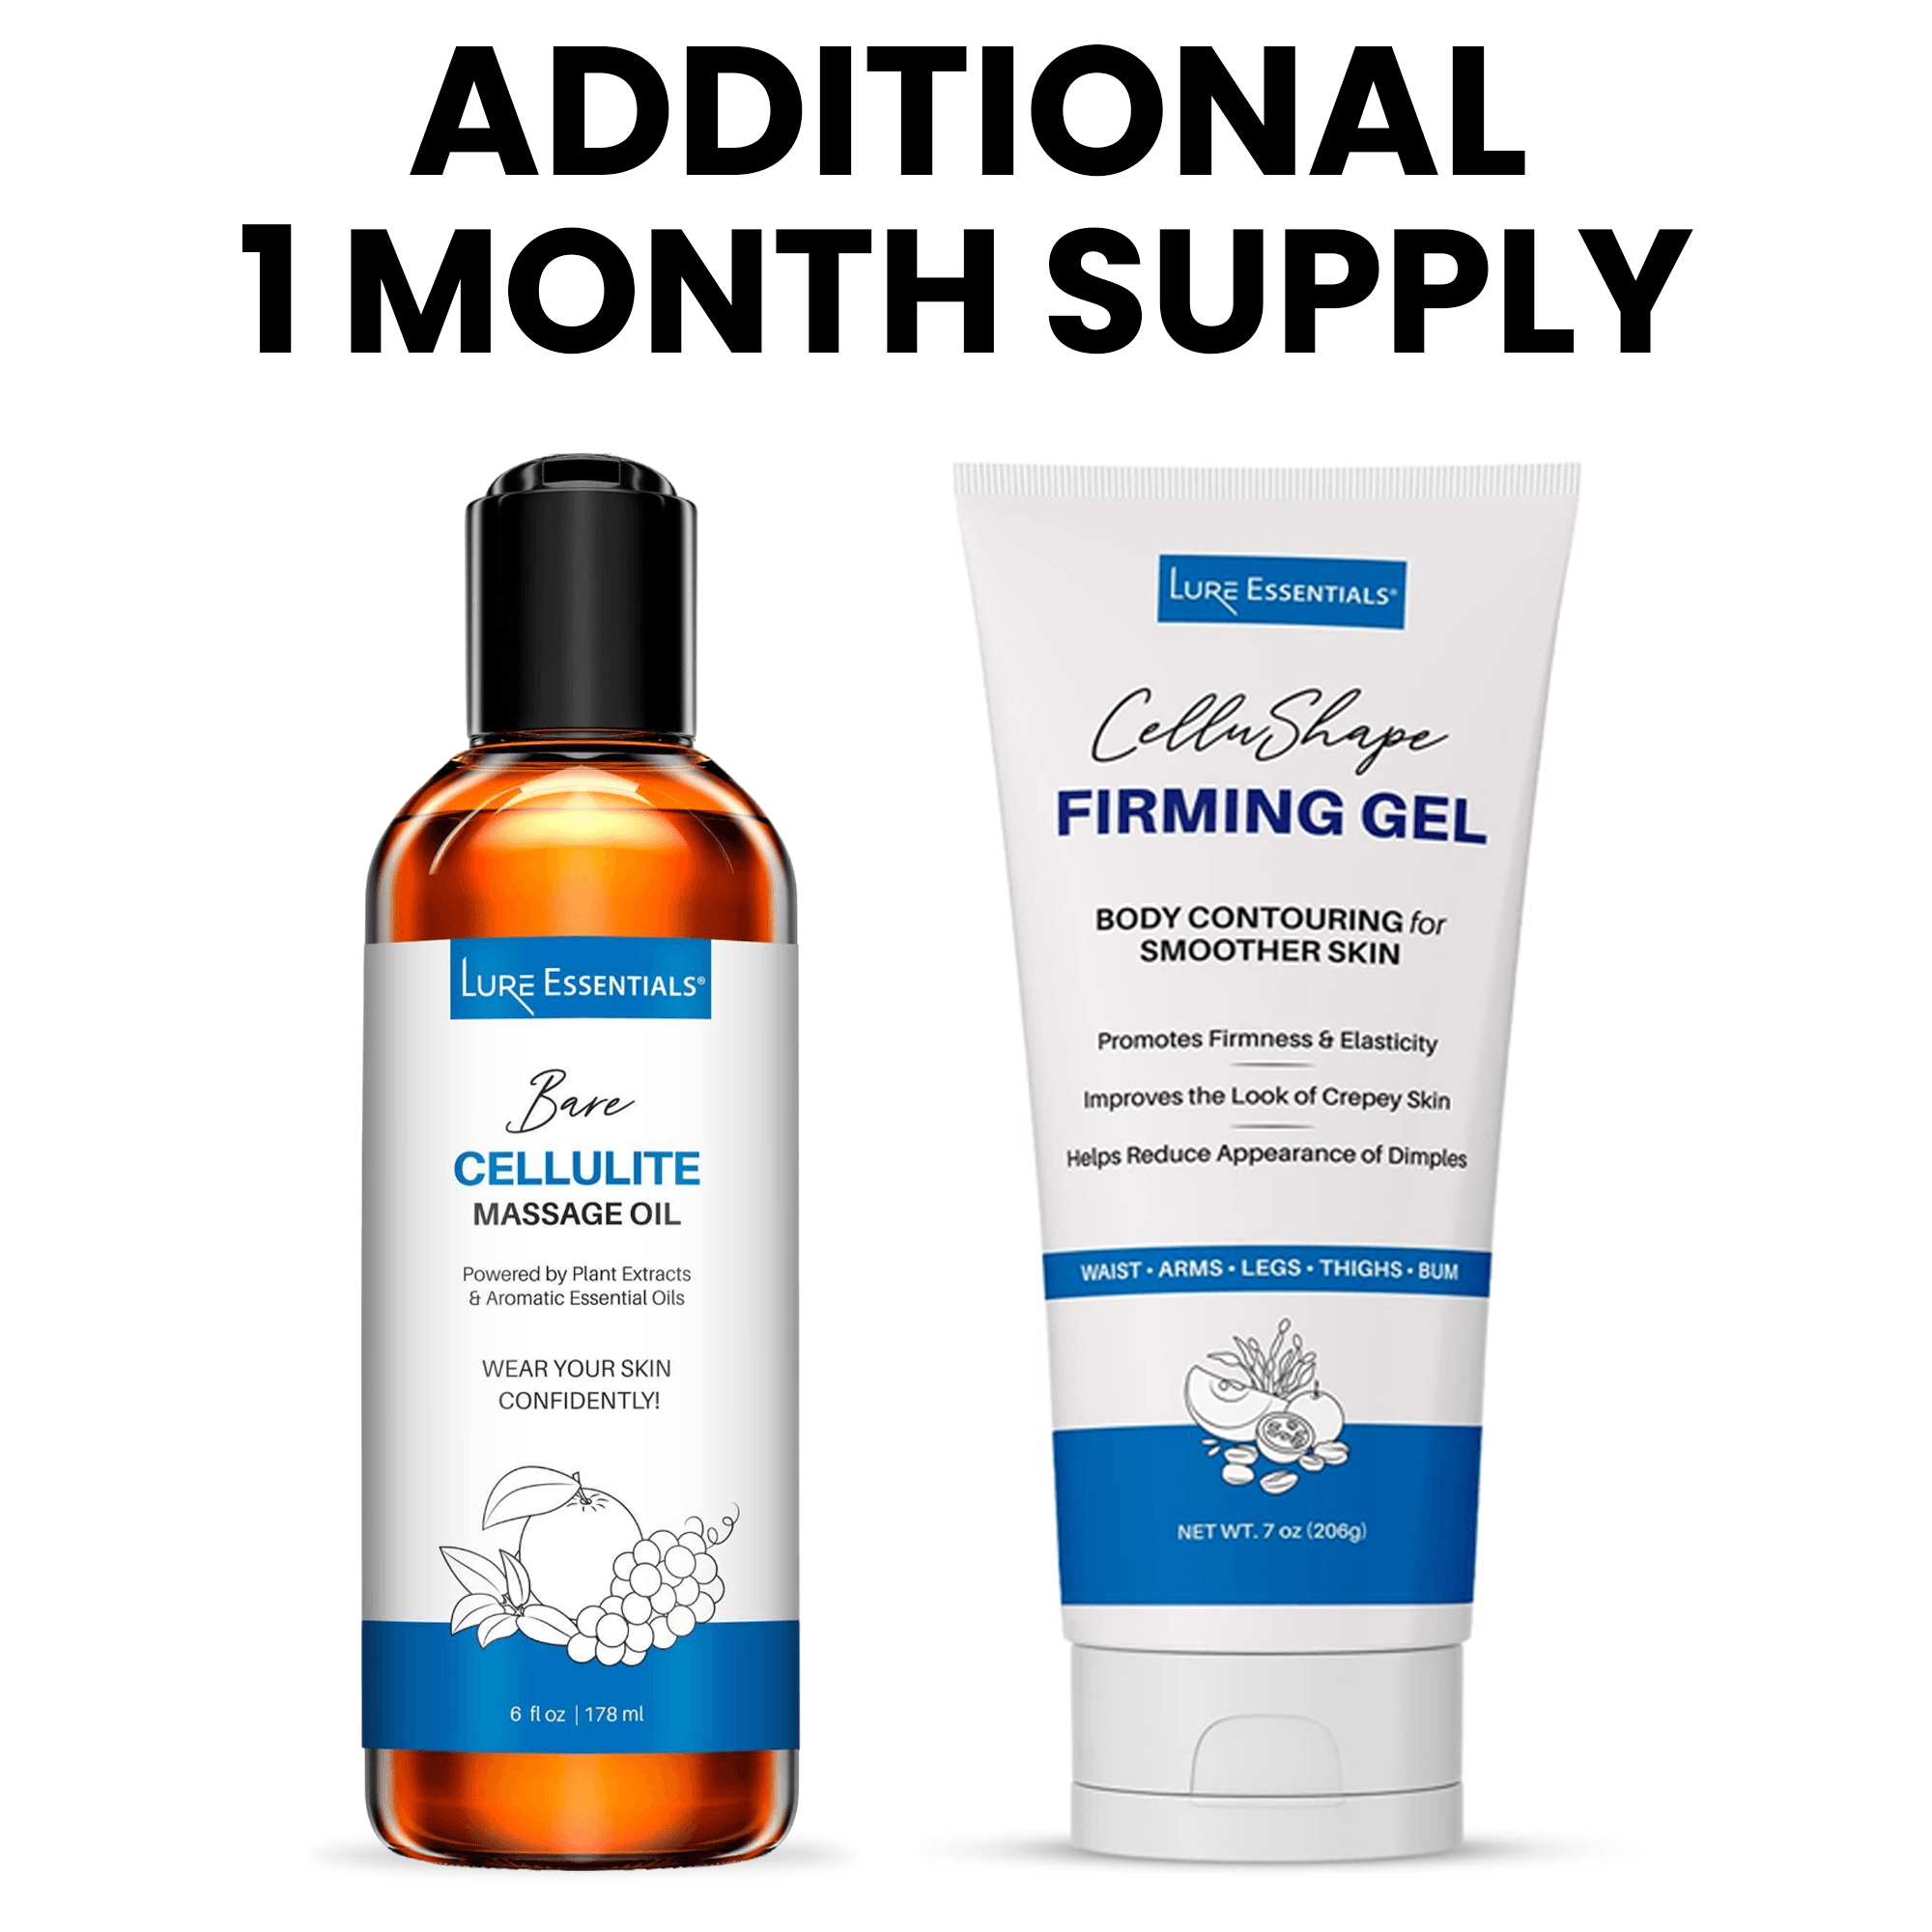 Additional 1 Month Supply